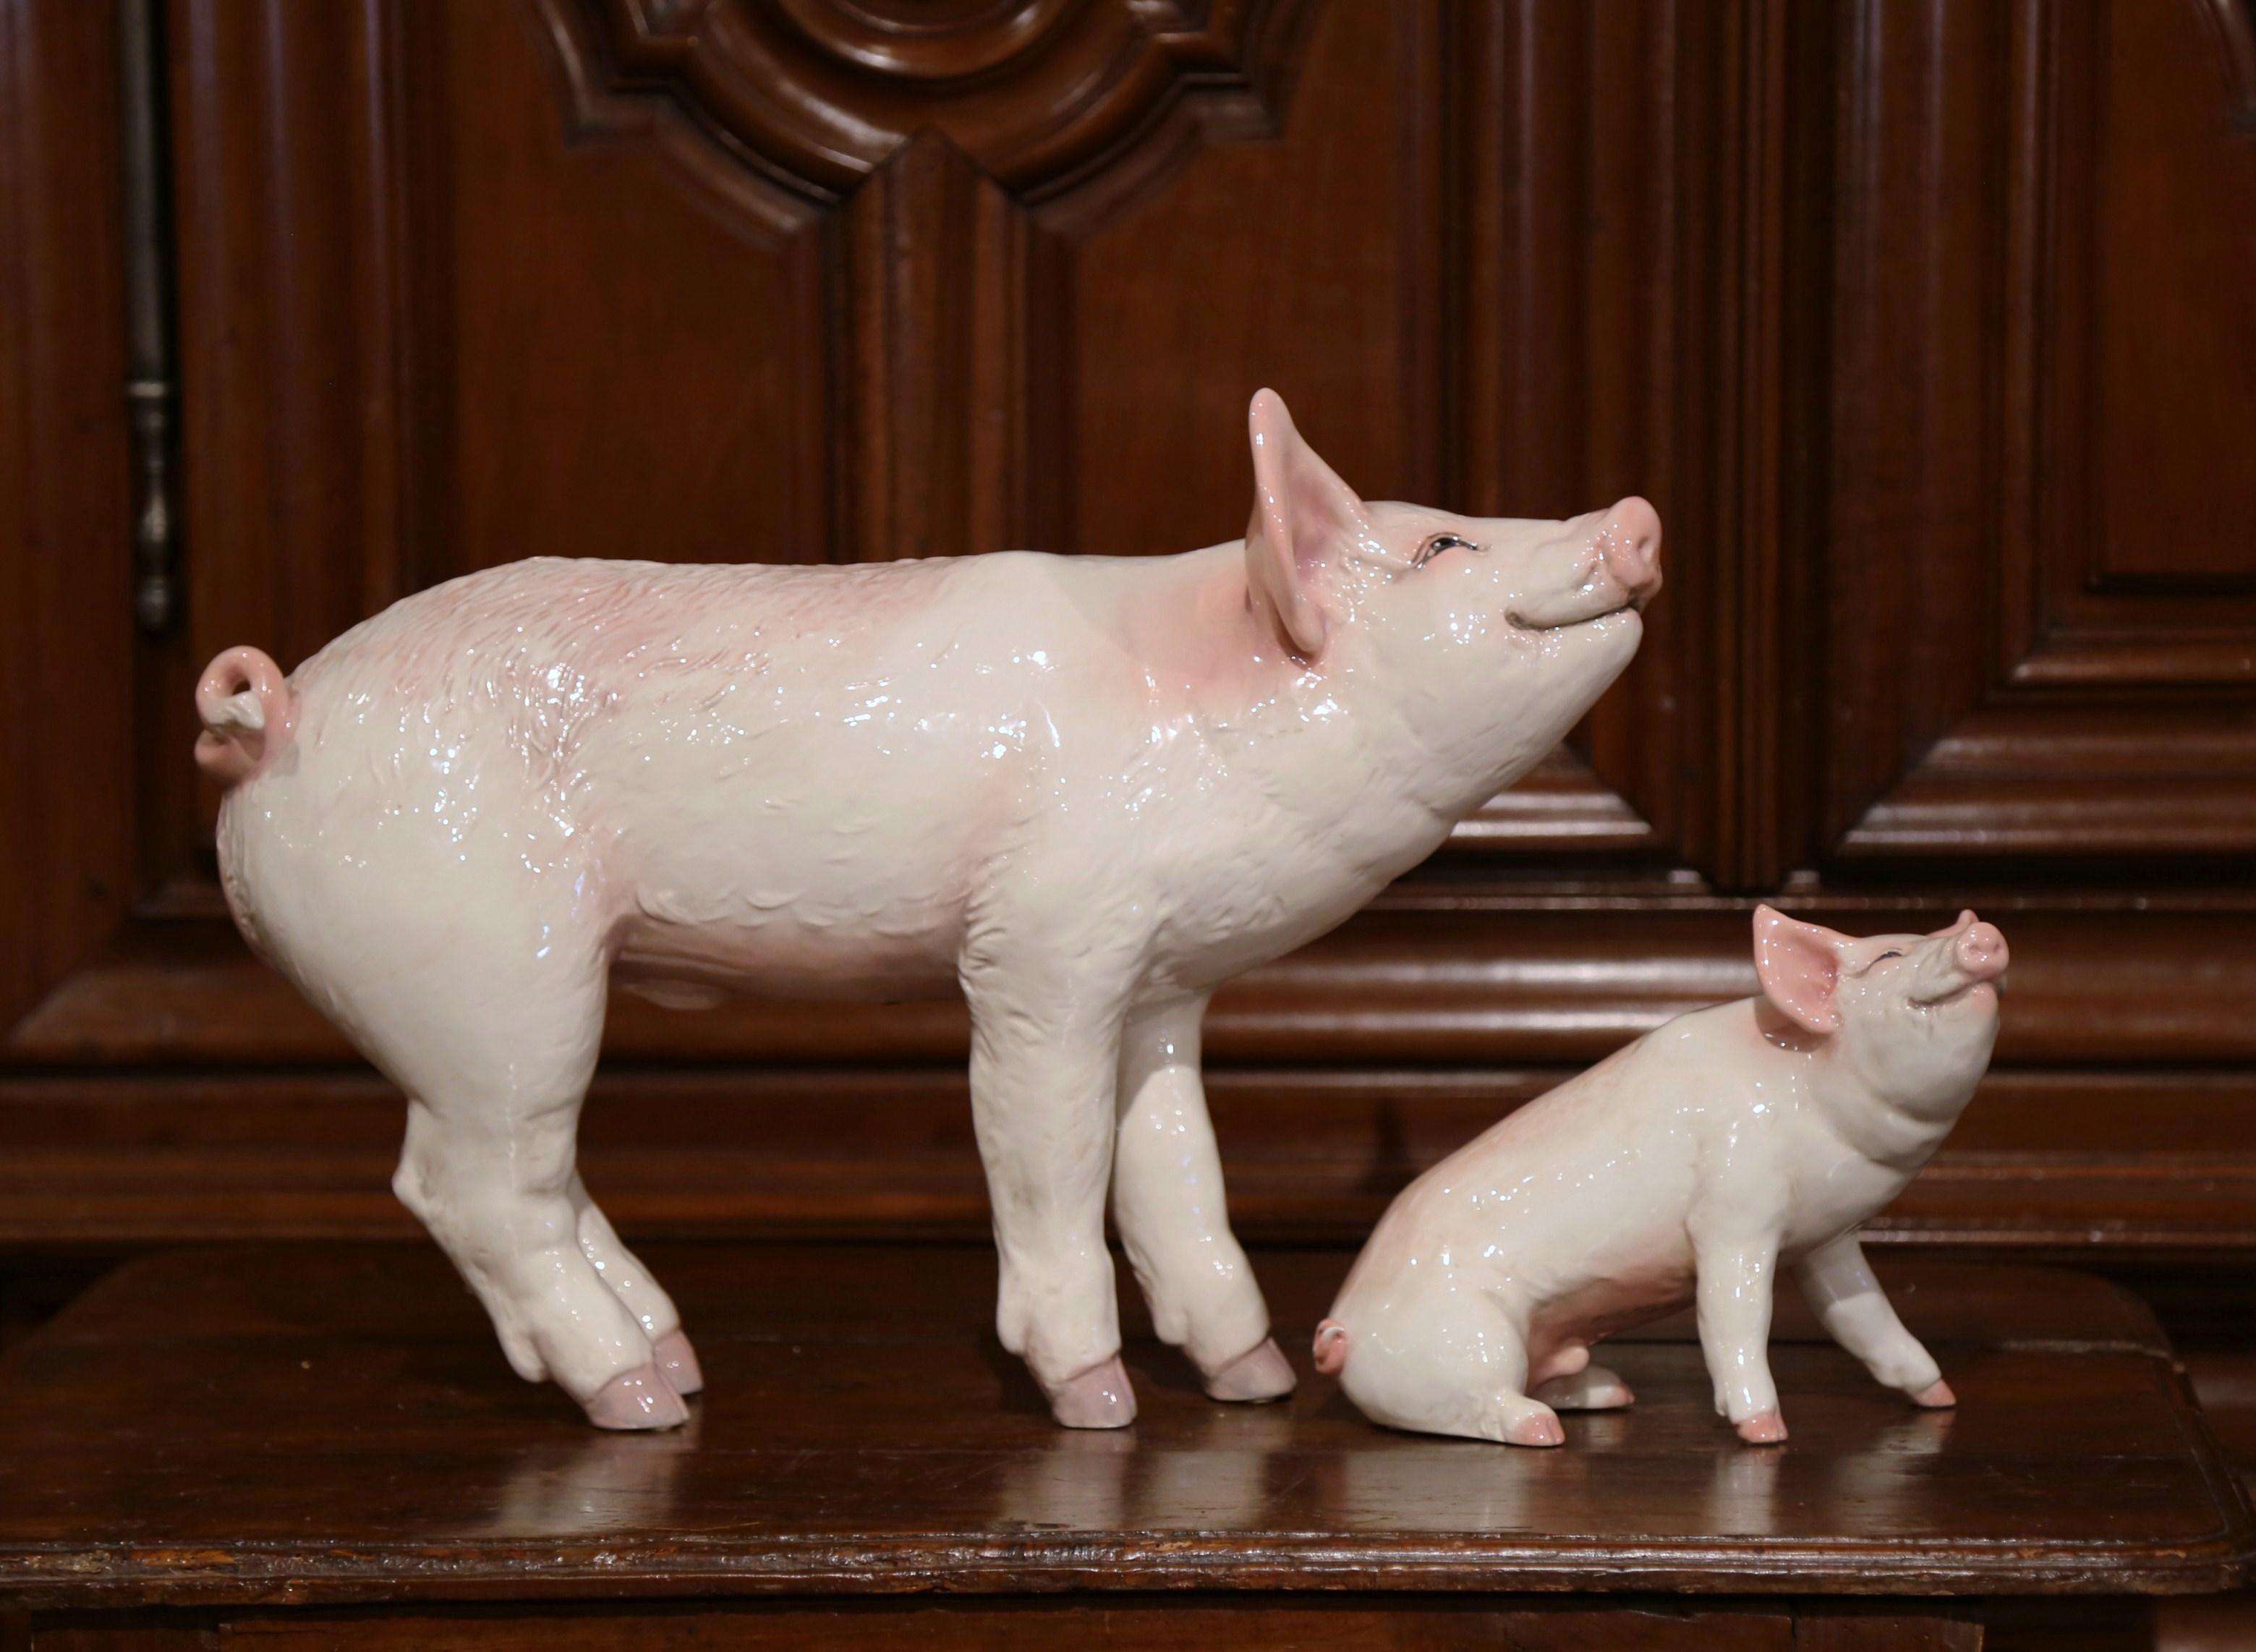 Decorate your kitchen counter with this superb set of sculptured, ceramic pigs. Crafted, circa 1980, the large pig and piglet figures are colorful, expressive, detailed, and realistic in shape and texture. The picturesque farm animals are in